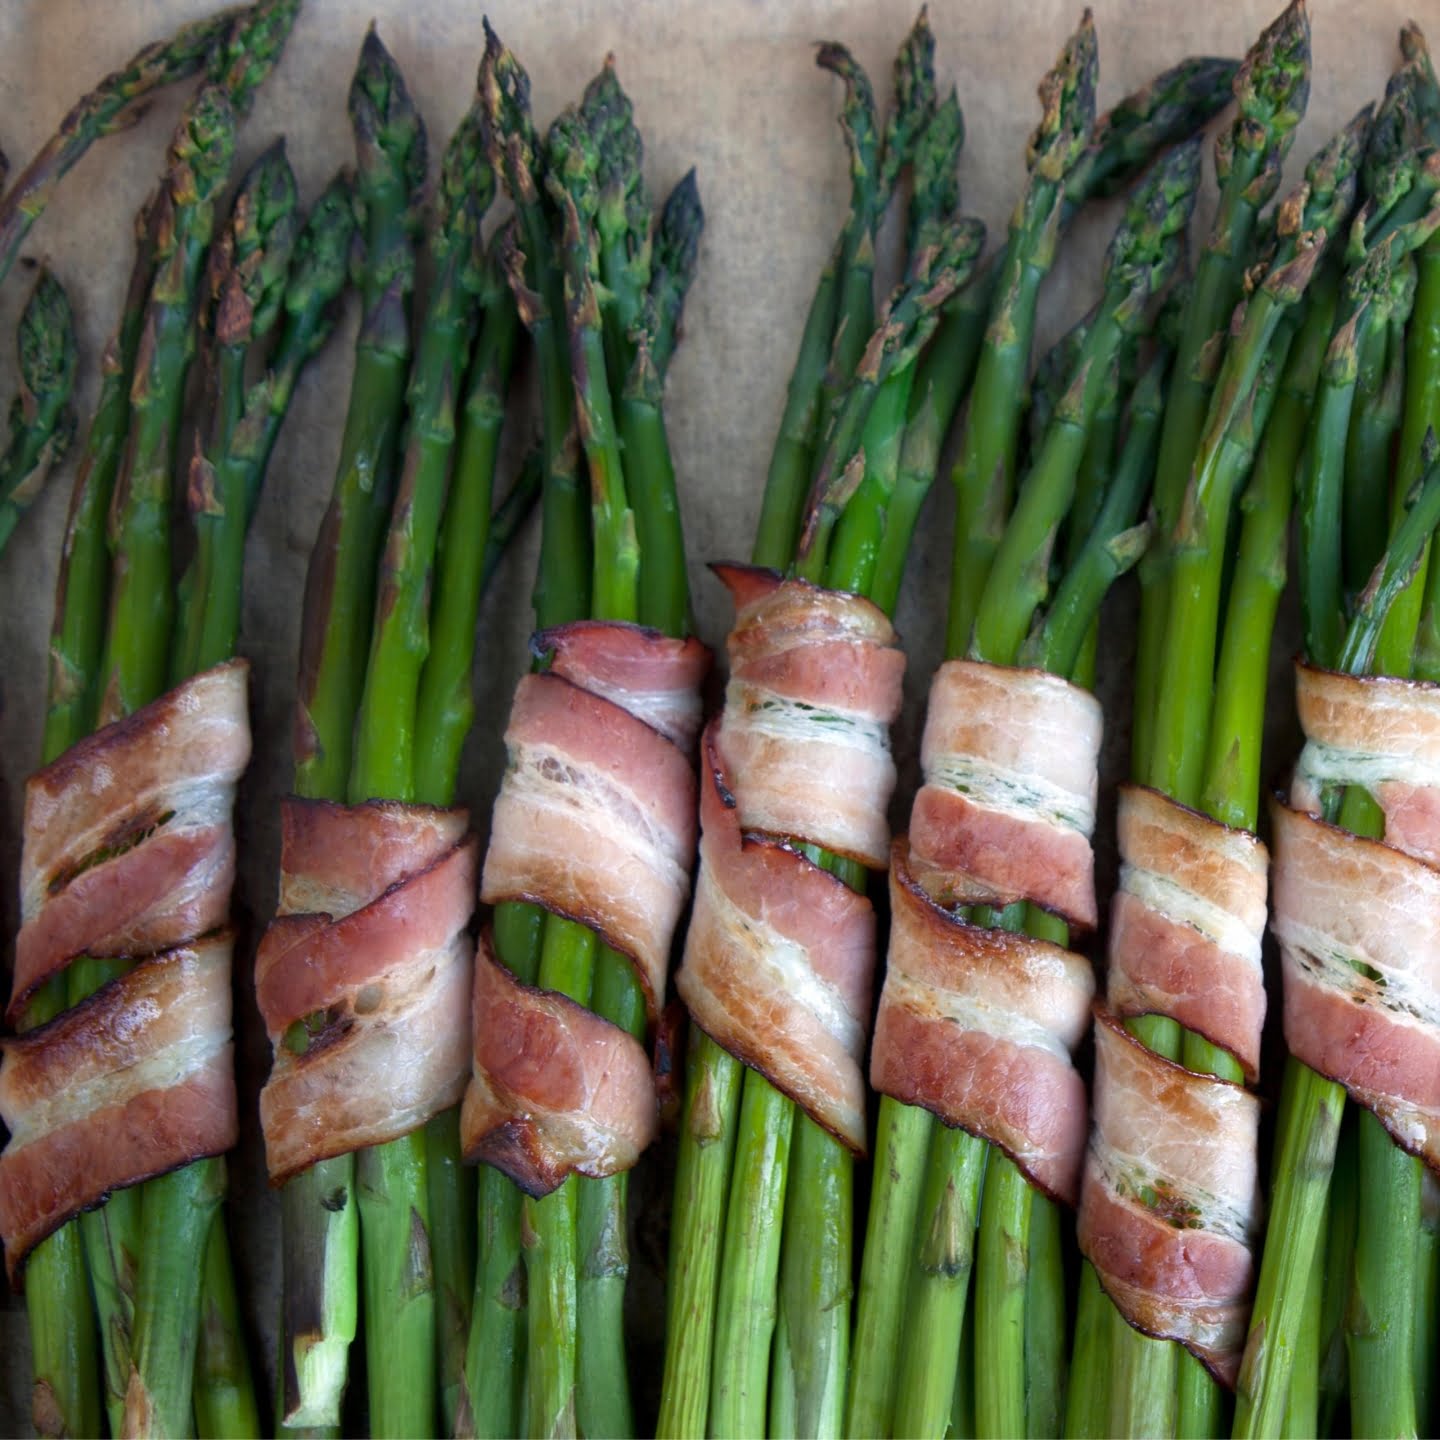 Perfectly baked green asparagus wrapped in bacon.